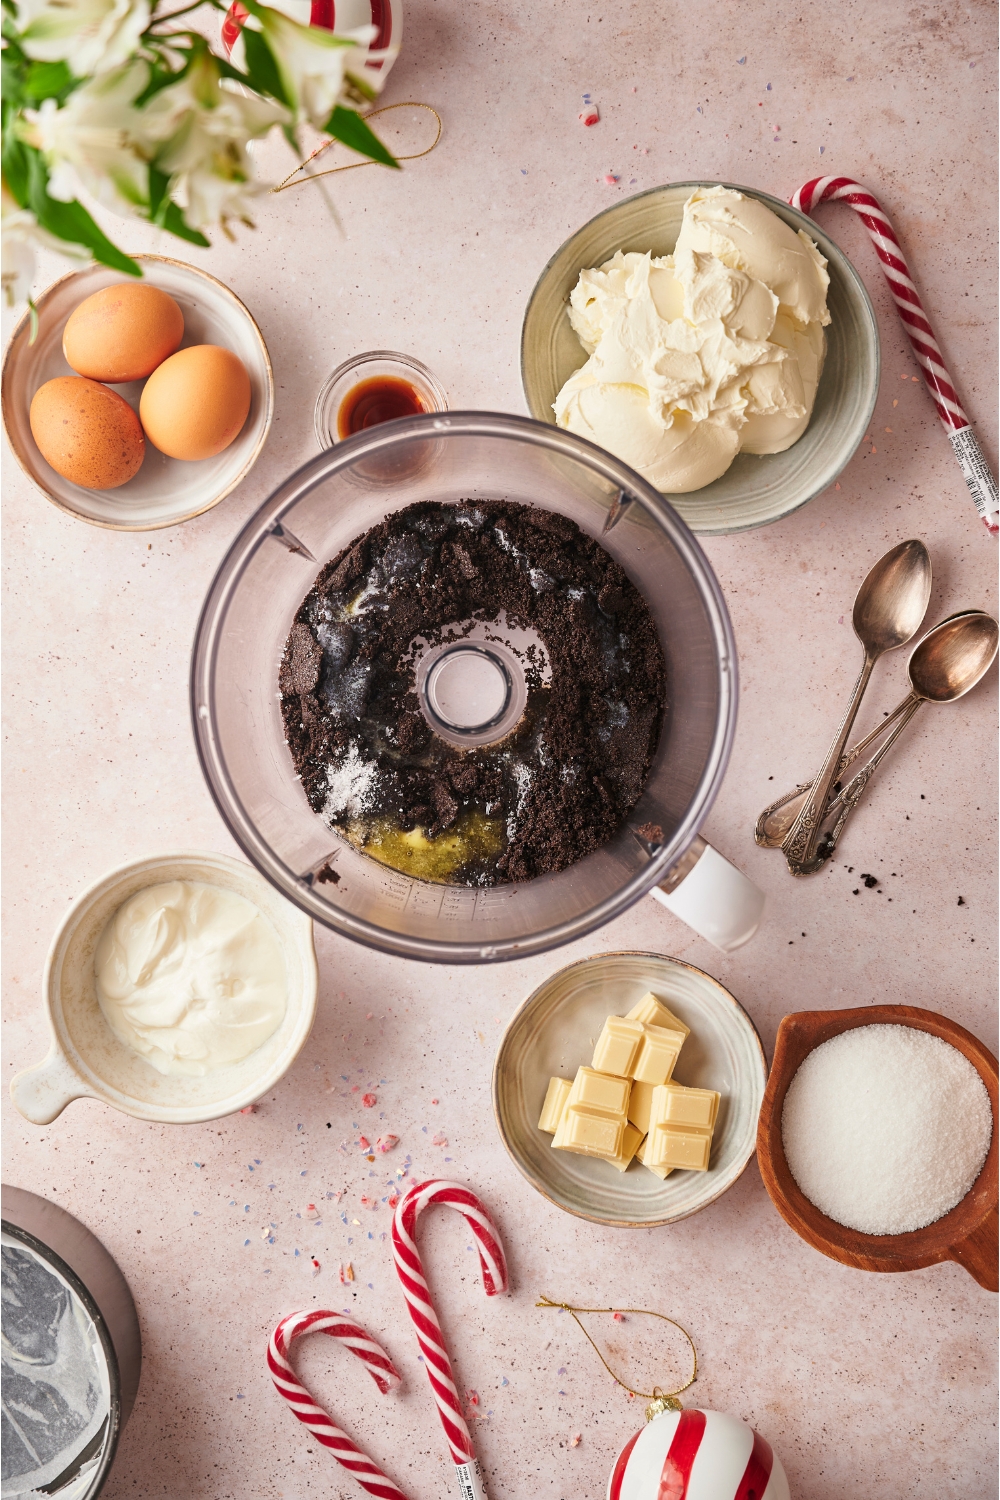 Food processor with dark chocolate crumbs and melted butter, surrounded by ingredients including bowls of white chocolate, cream cheese, eggs, sugar, and vanilla extract.